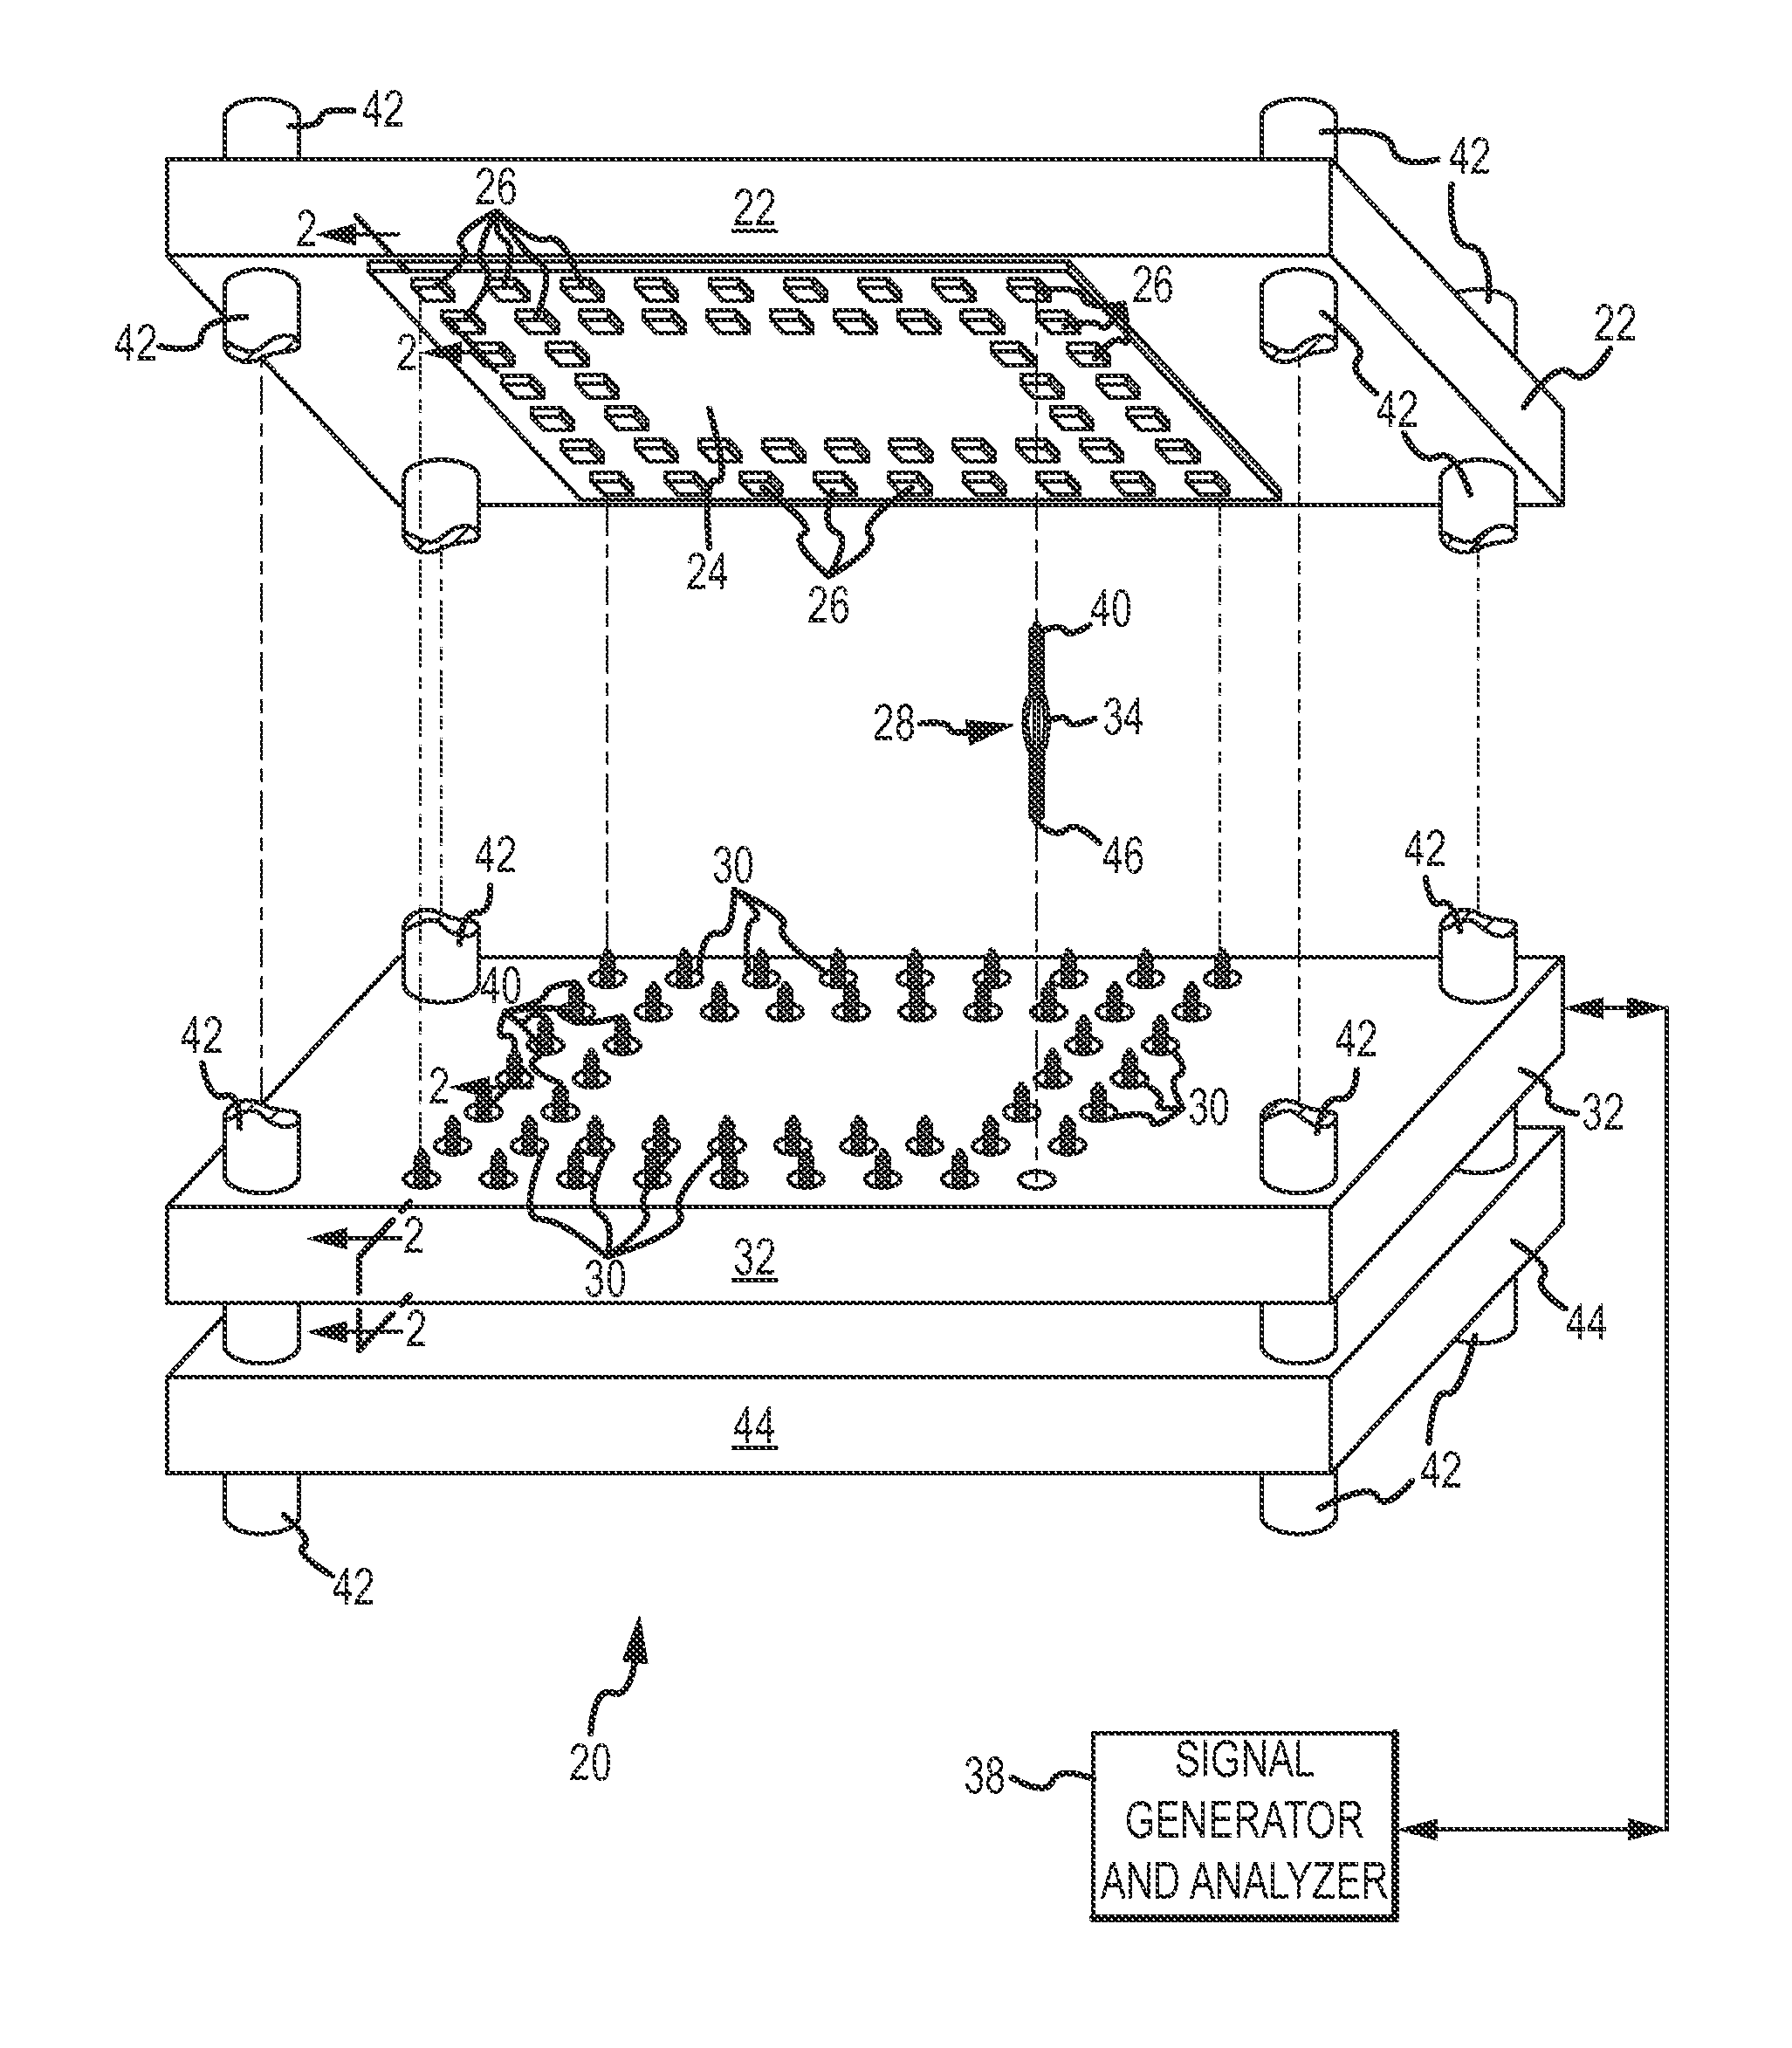 Interconnection Interface Using Twist Pins for Testing and Docking